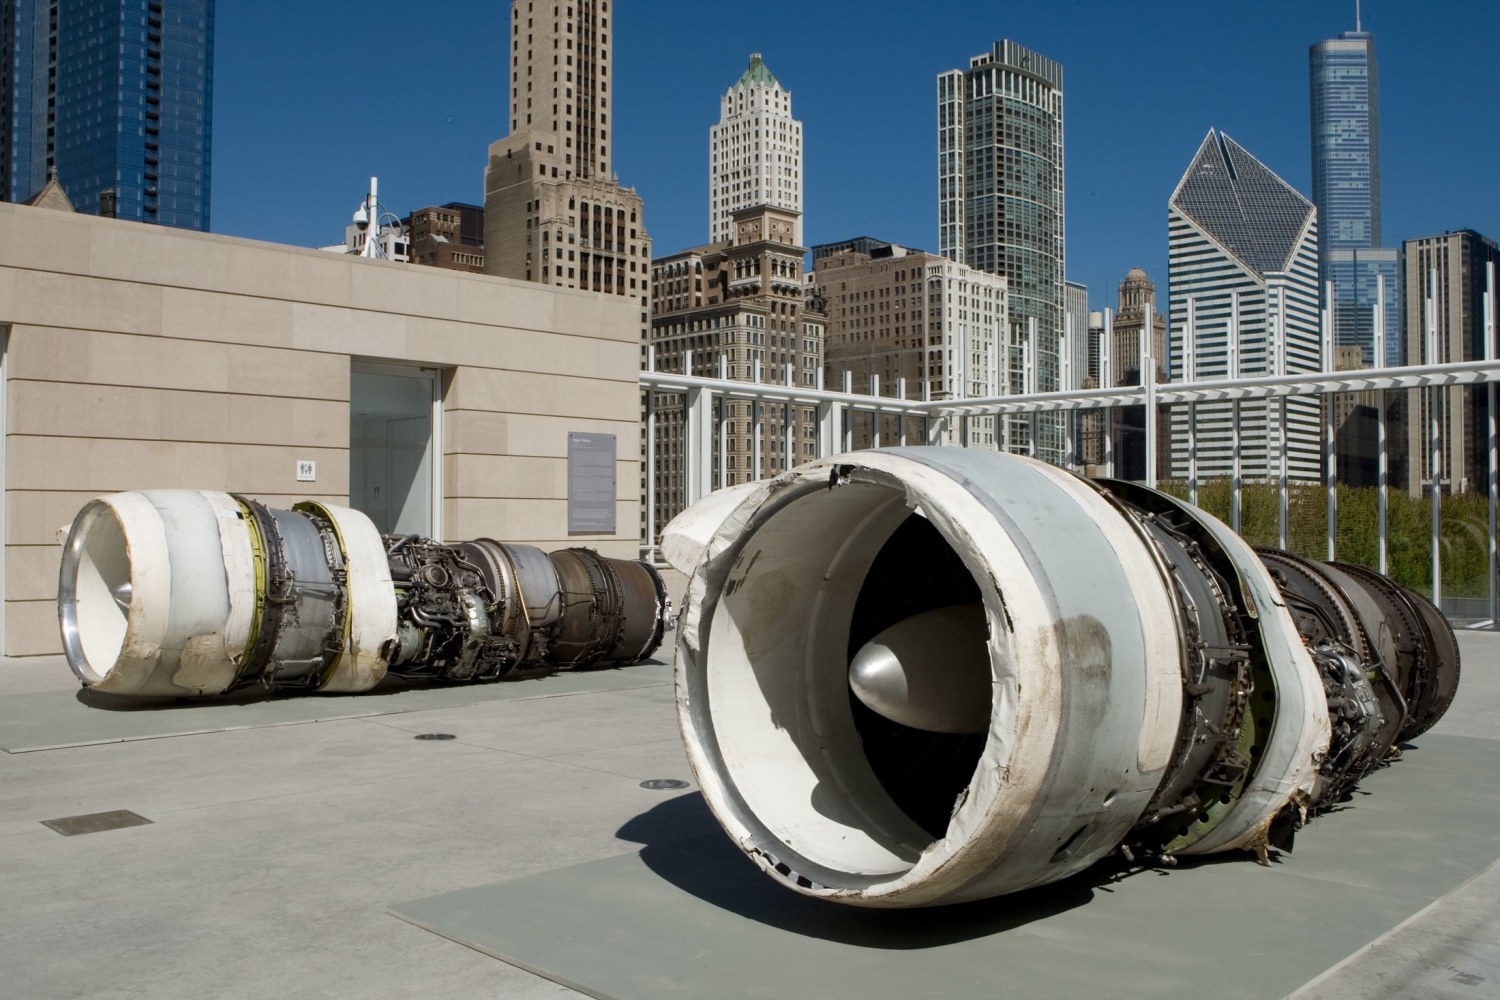 Roger Hiorns
Untitled (Alliance), 2010
Pratt &amp;amp; Whitney TF33 P9 engines that were once mounted on a Boeing EC-135 surveillance plane, Effexor, Citalopram, and Mannitol
Dimensions variable
Installation view at The Art Institute of Chicago
May 1 &amp;ndash; September 19, 2010